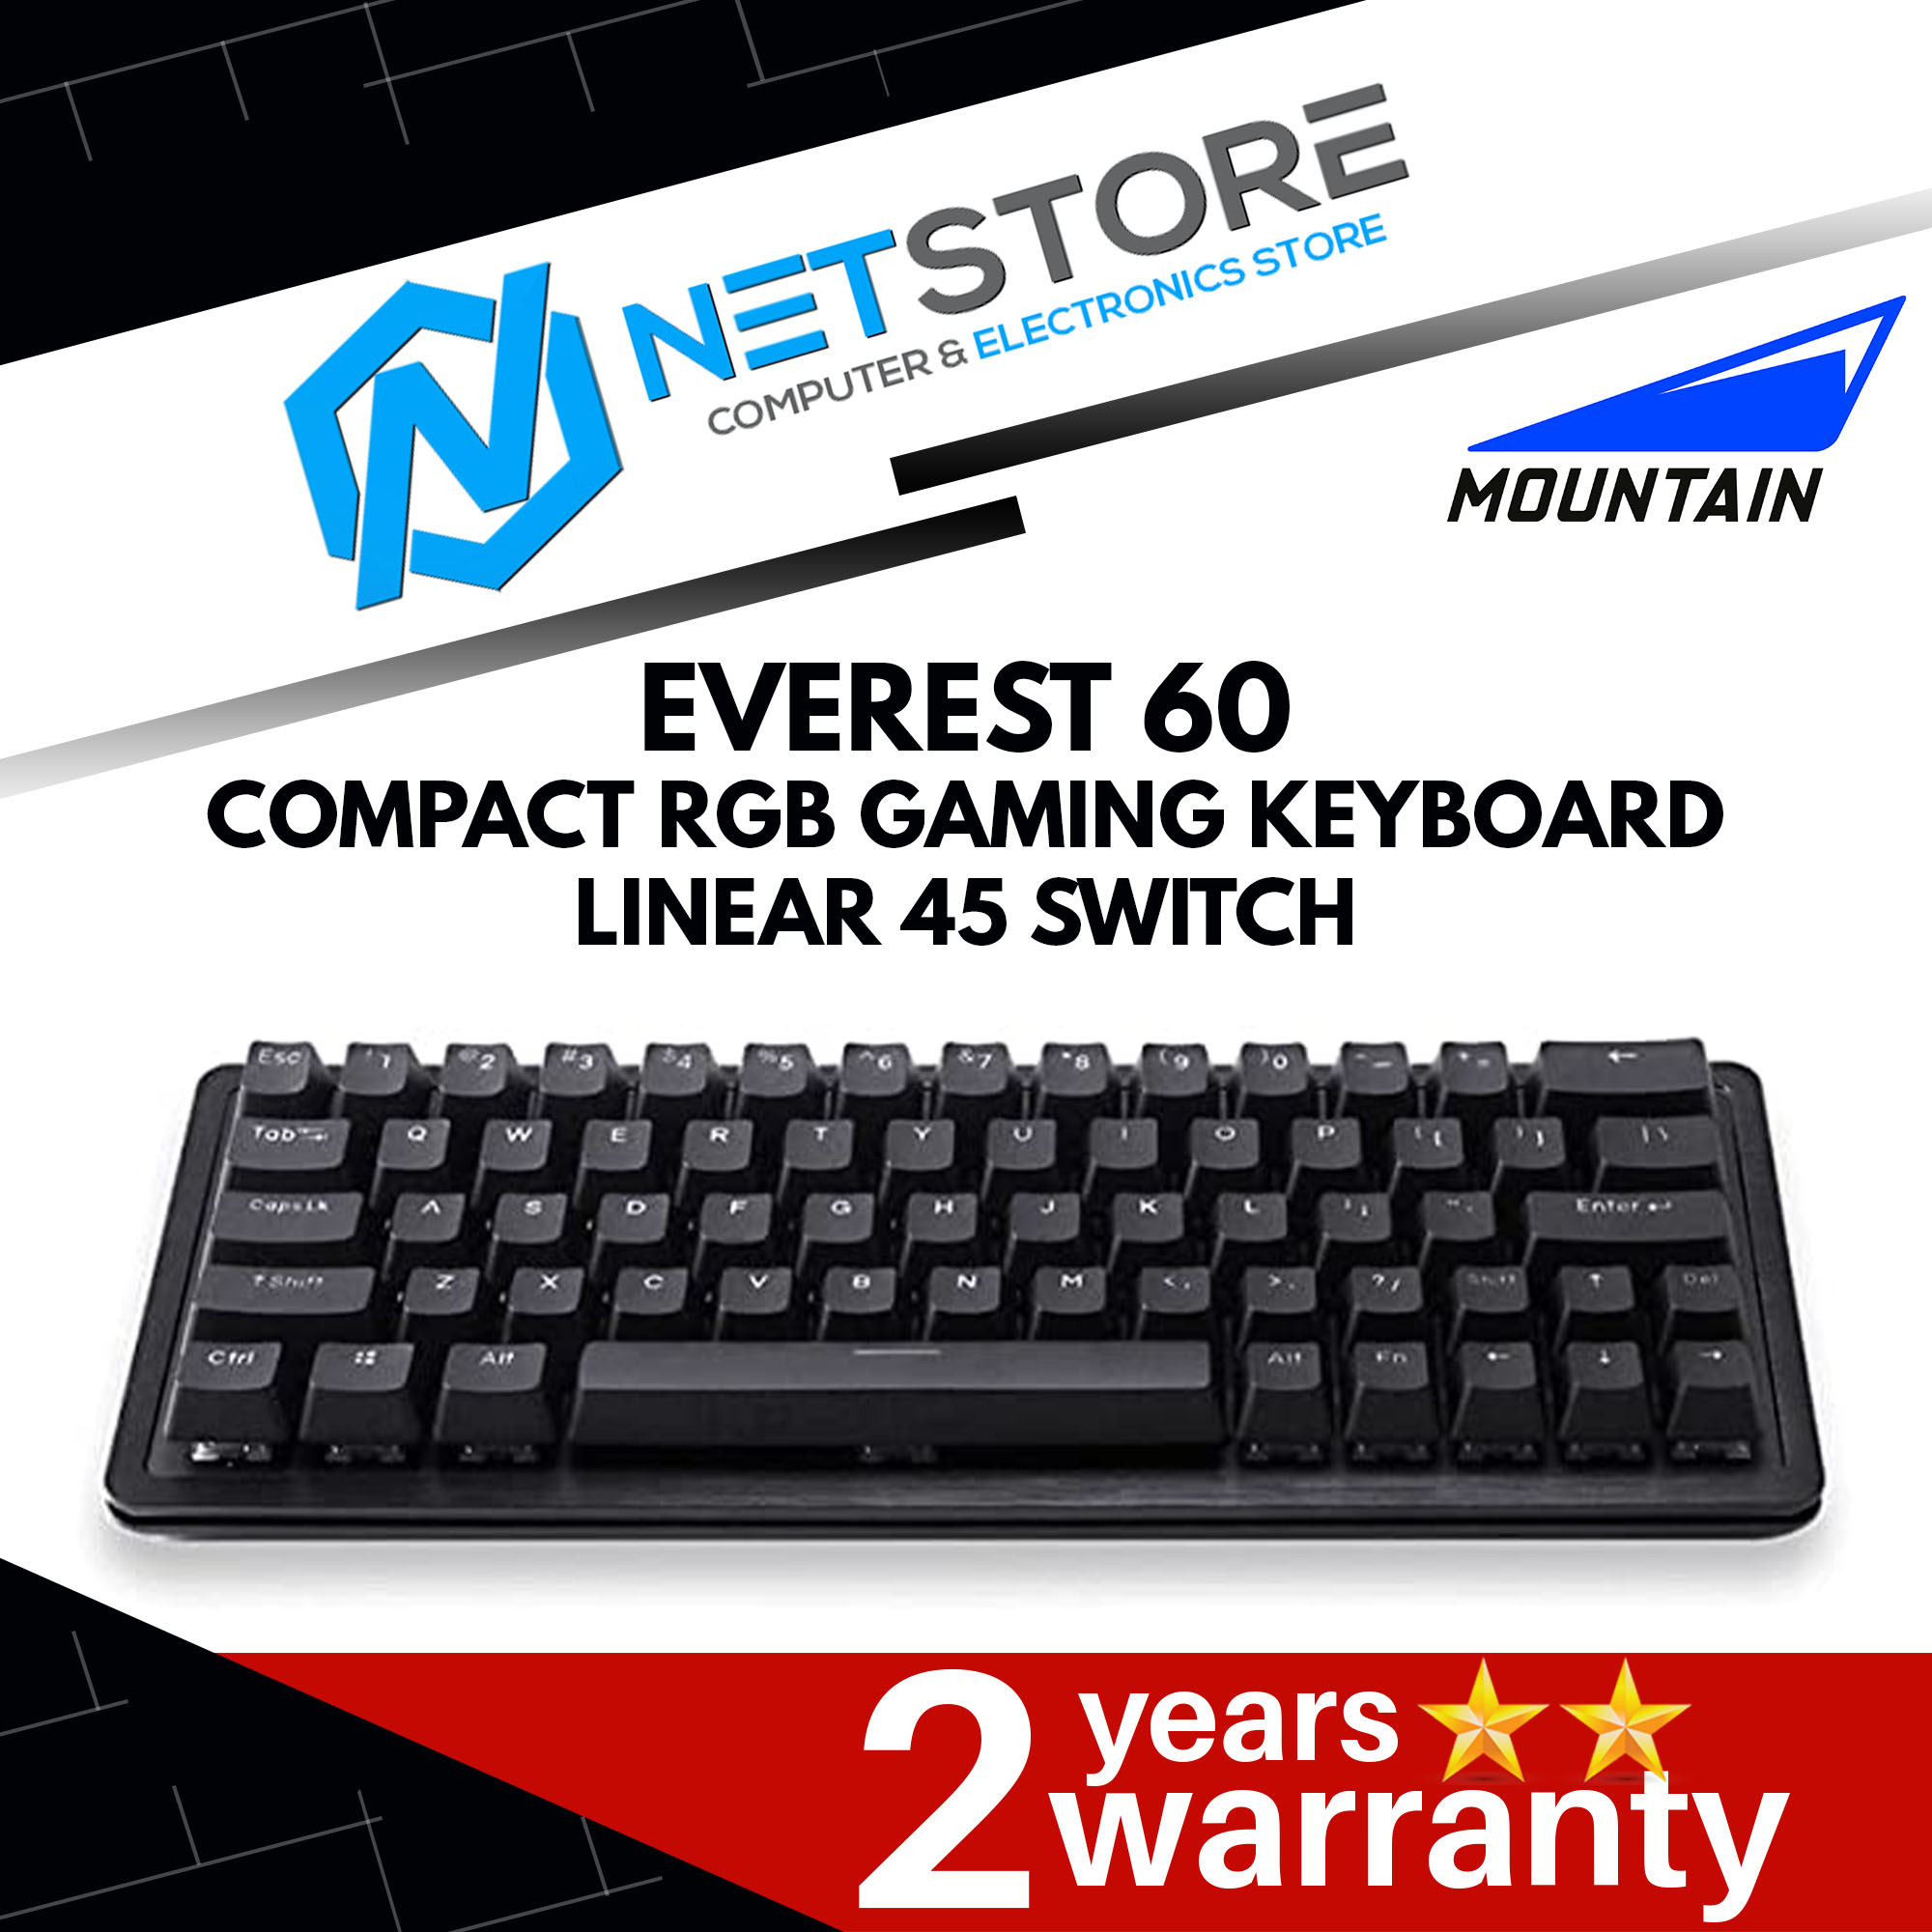 MOUNTAIN EVEREST 60 COMPACT RGB GAMING KEYBOARD LINEAR 45 SWITCH